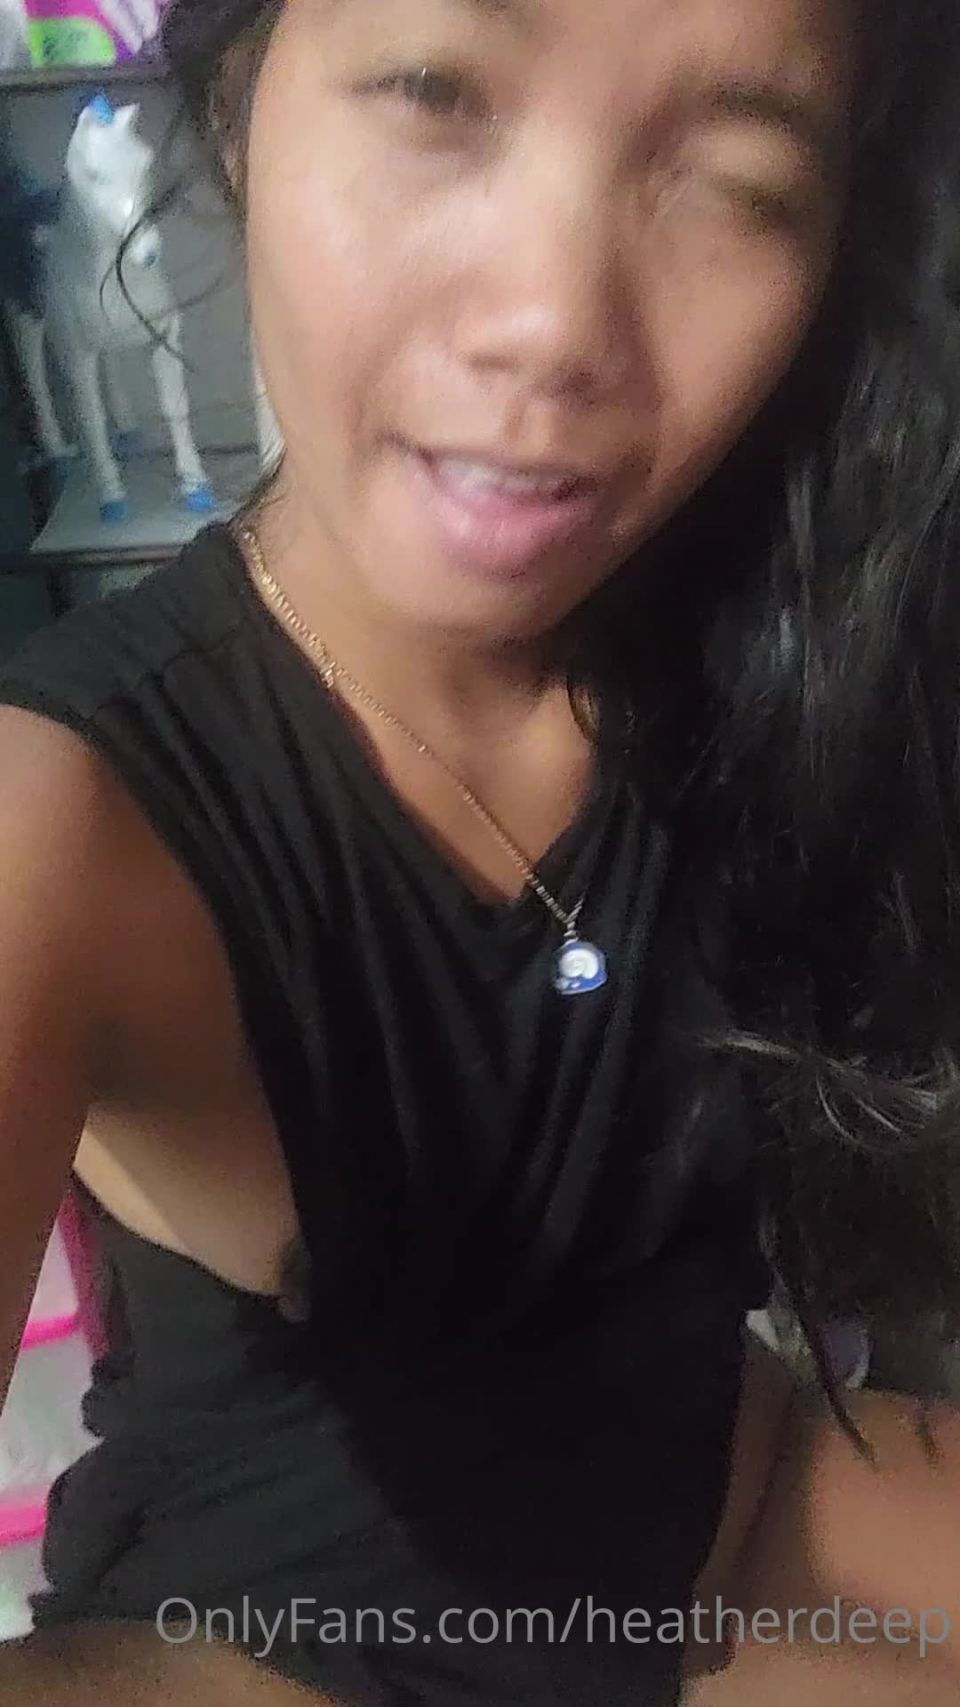 Onlyfans - heatherdeep - Wake up with a creampie in my pussy  creampie cuminpussy creamypussy - 02-10-2021